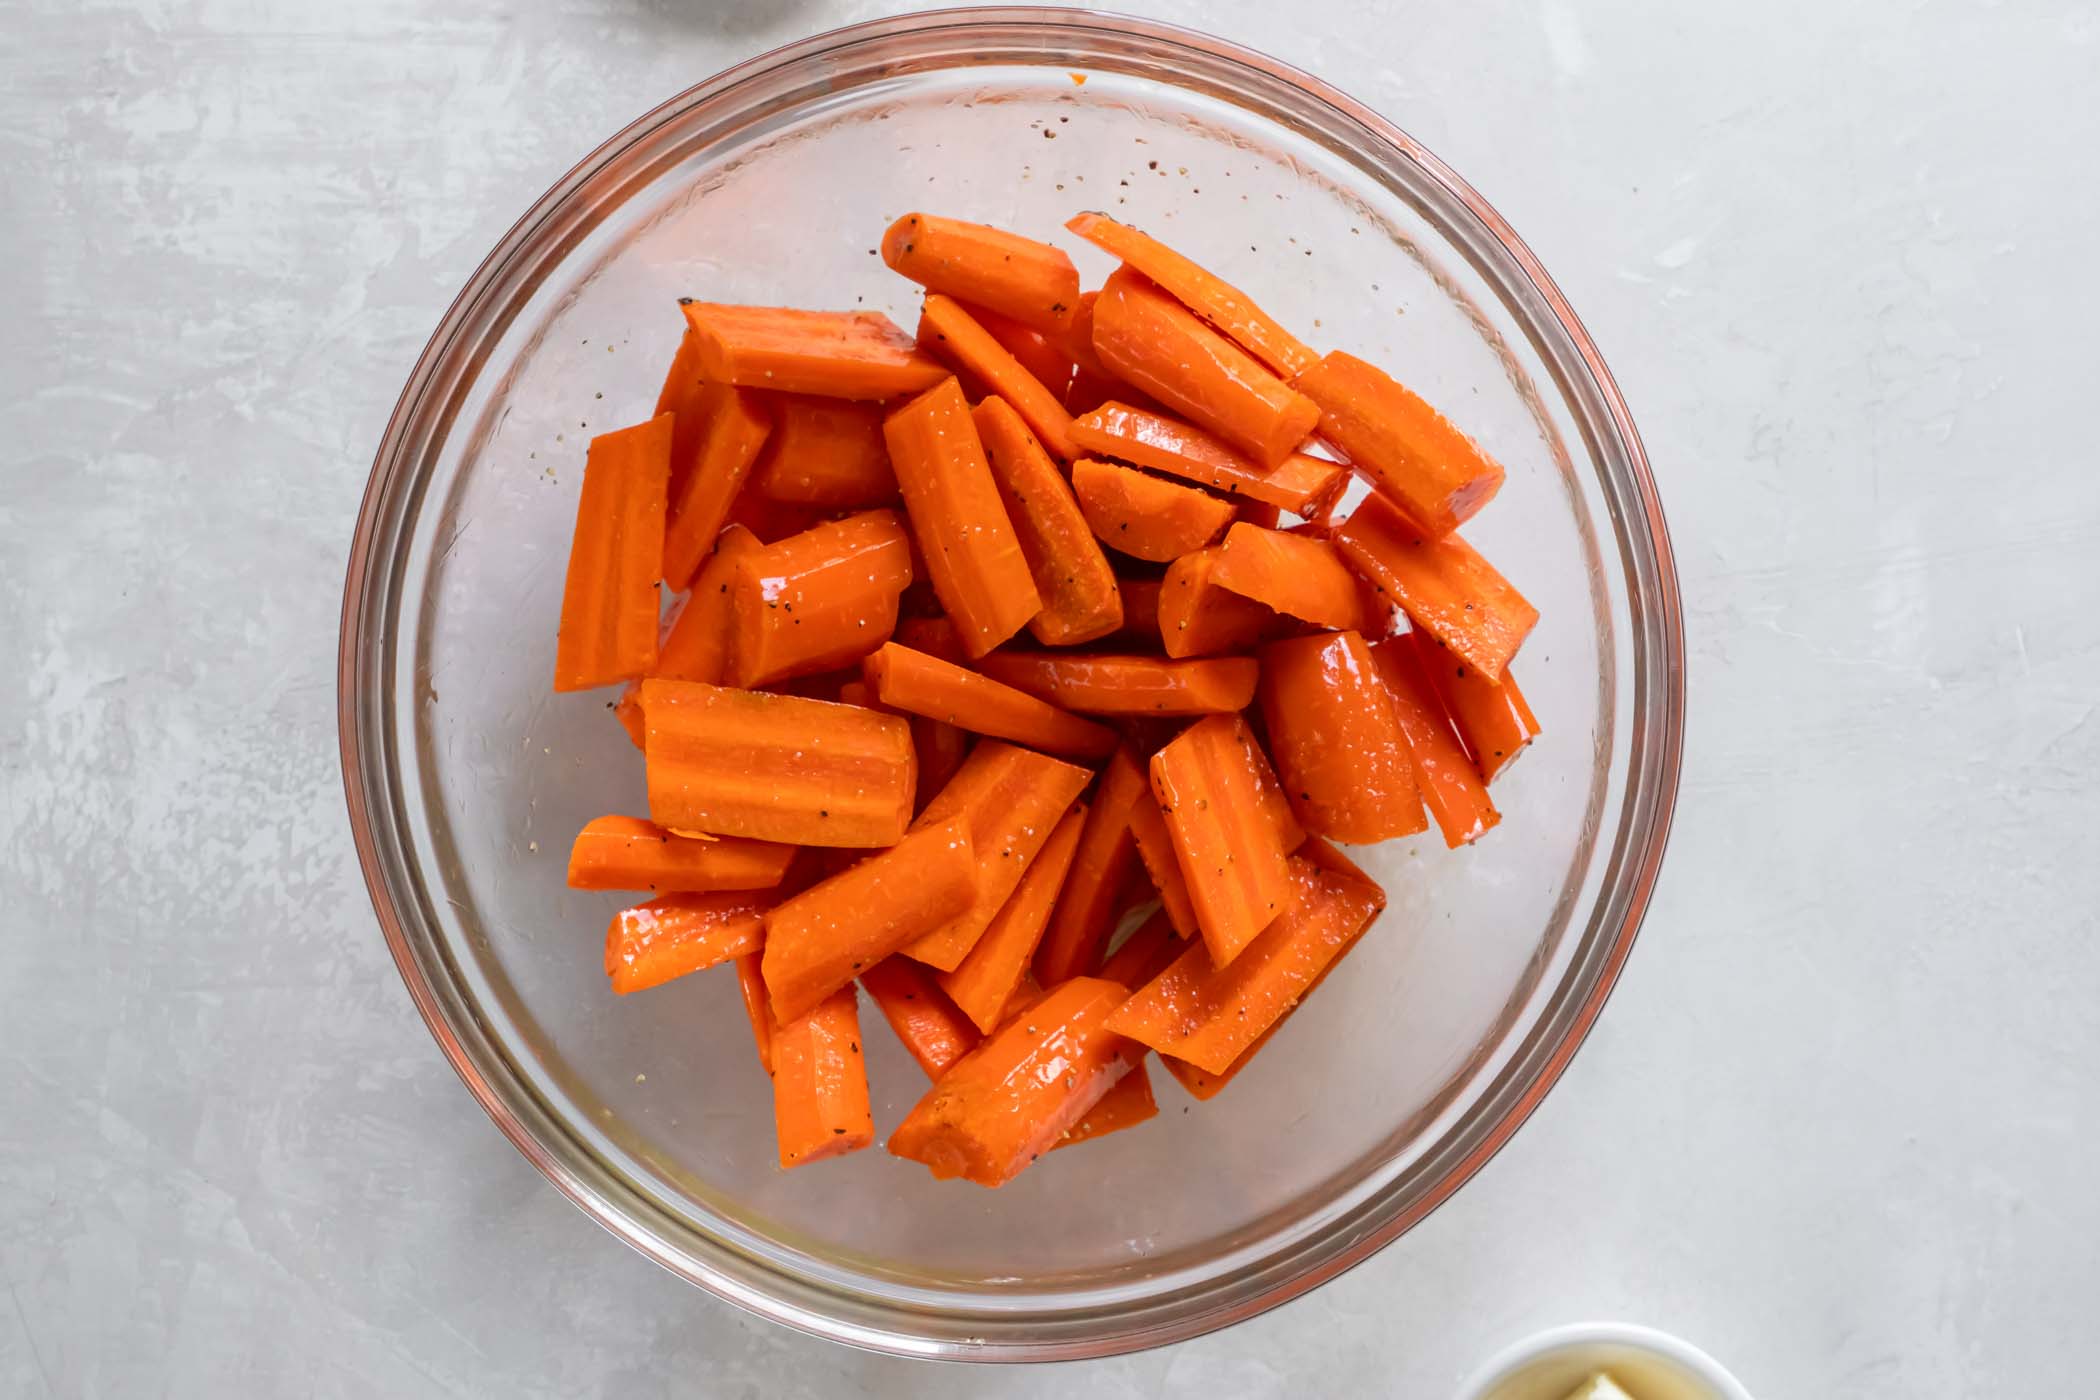 Chopped carrots in a bowl tossed with olive oil, salt and pepper.